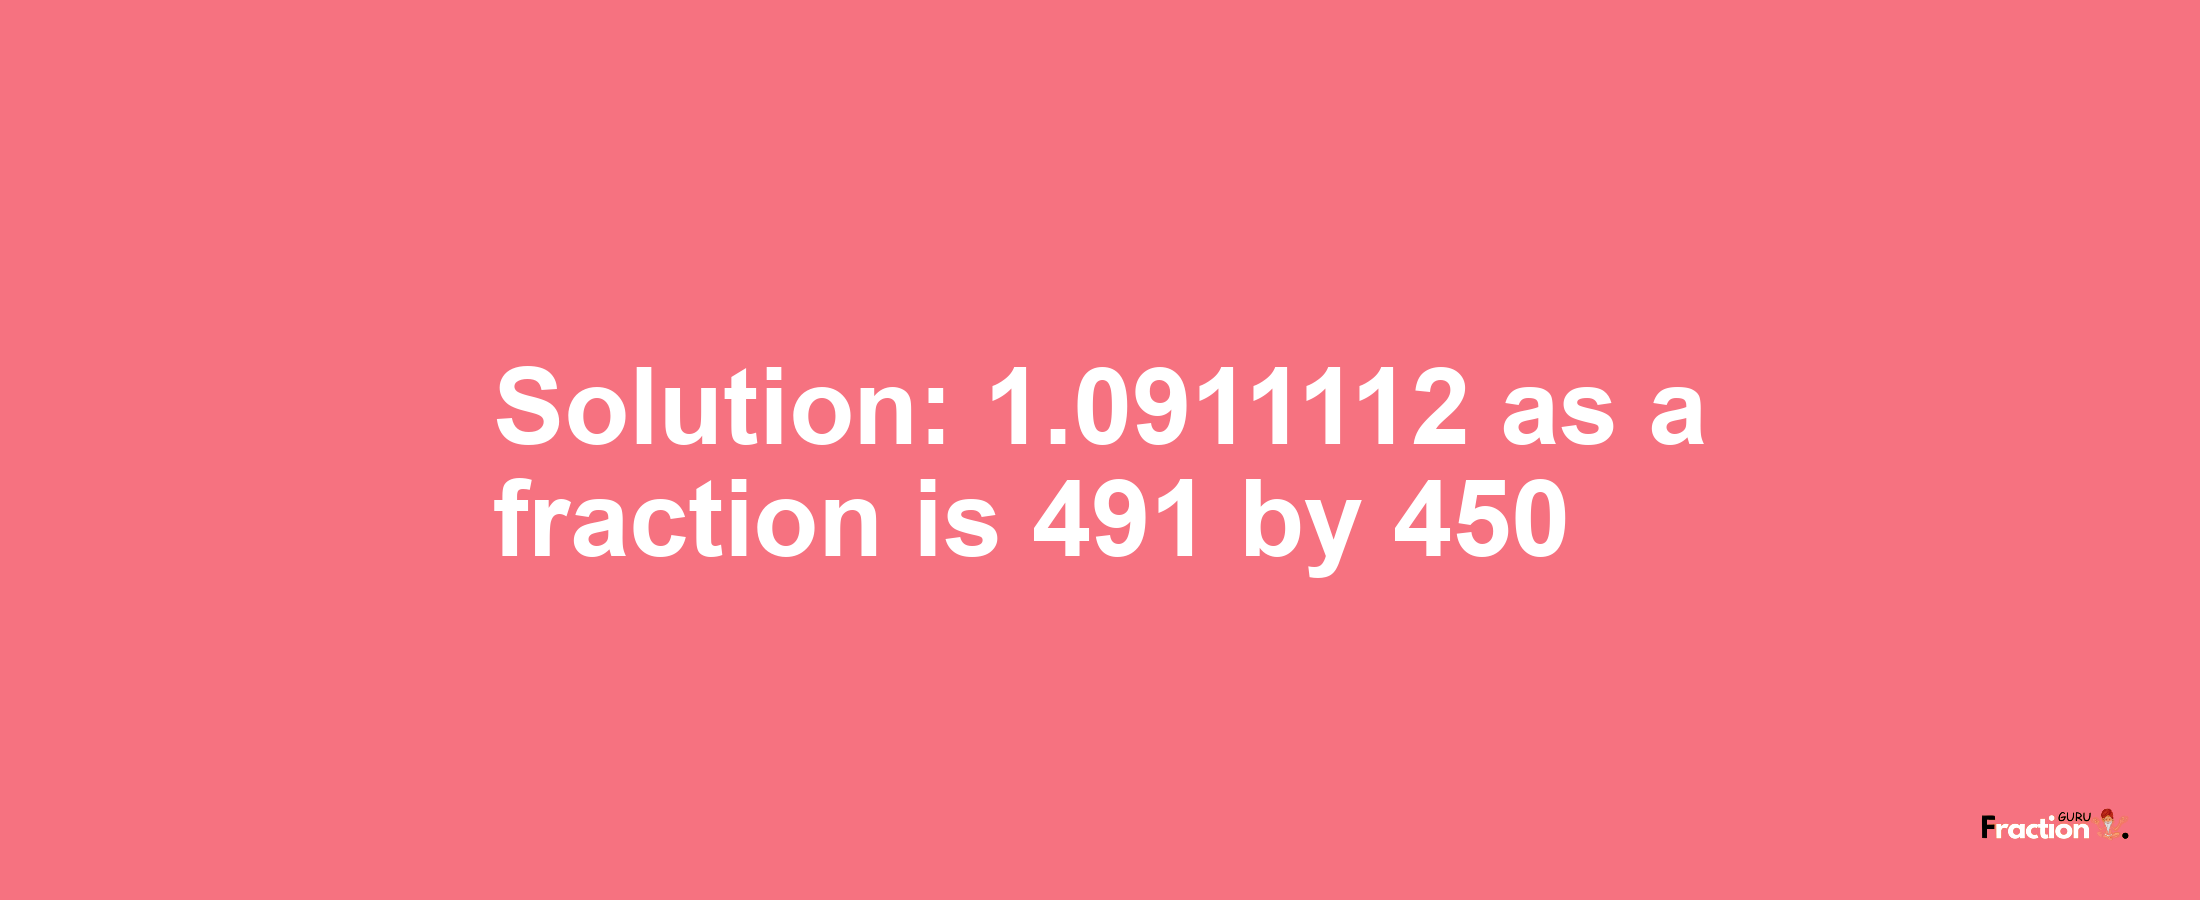 Solution:1.0911112 as a fraction is 491/450